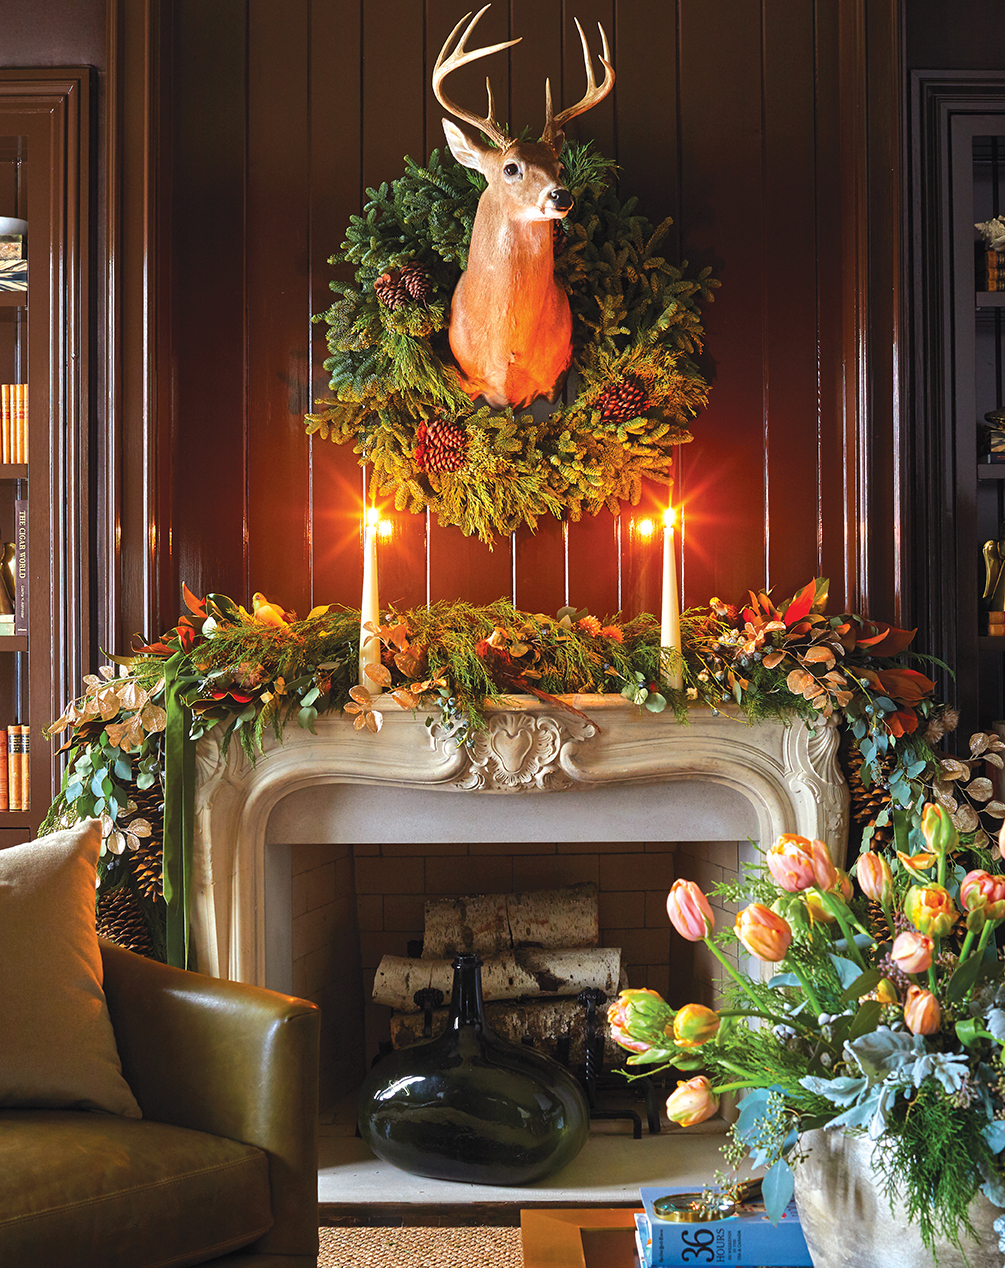 Four Floral Designers' Holiday Decorating Tips